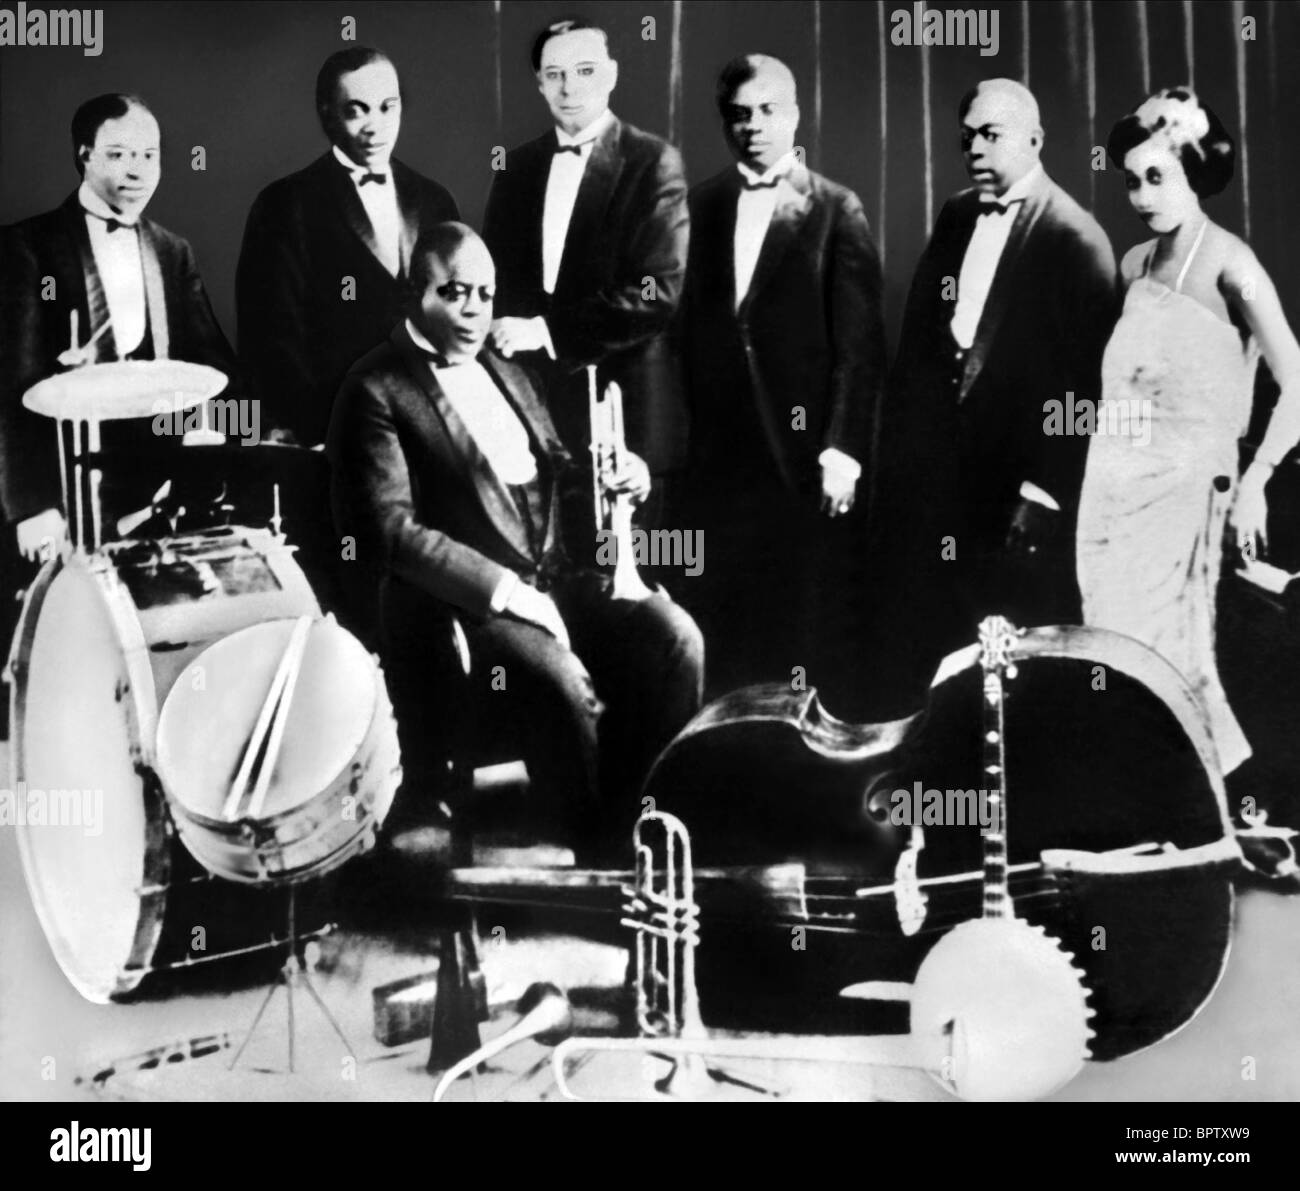 JOE 'KING' OLIVER BABY DODDS HONORE DUTREY BILL JOHNSON LOUIS ARMSTRONG JOHNNY DODDS & LIL HARDIN ARMSTRONG KING OLIVER'S C Stock Photo